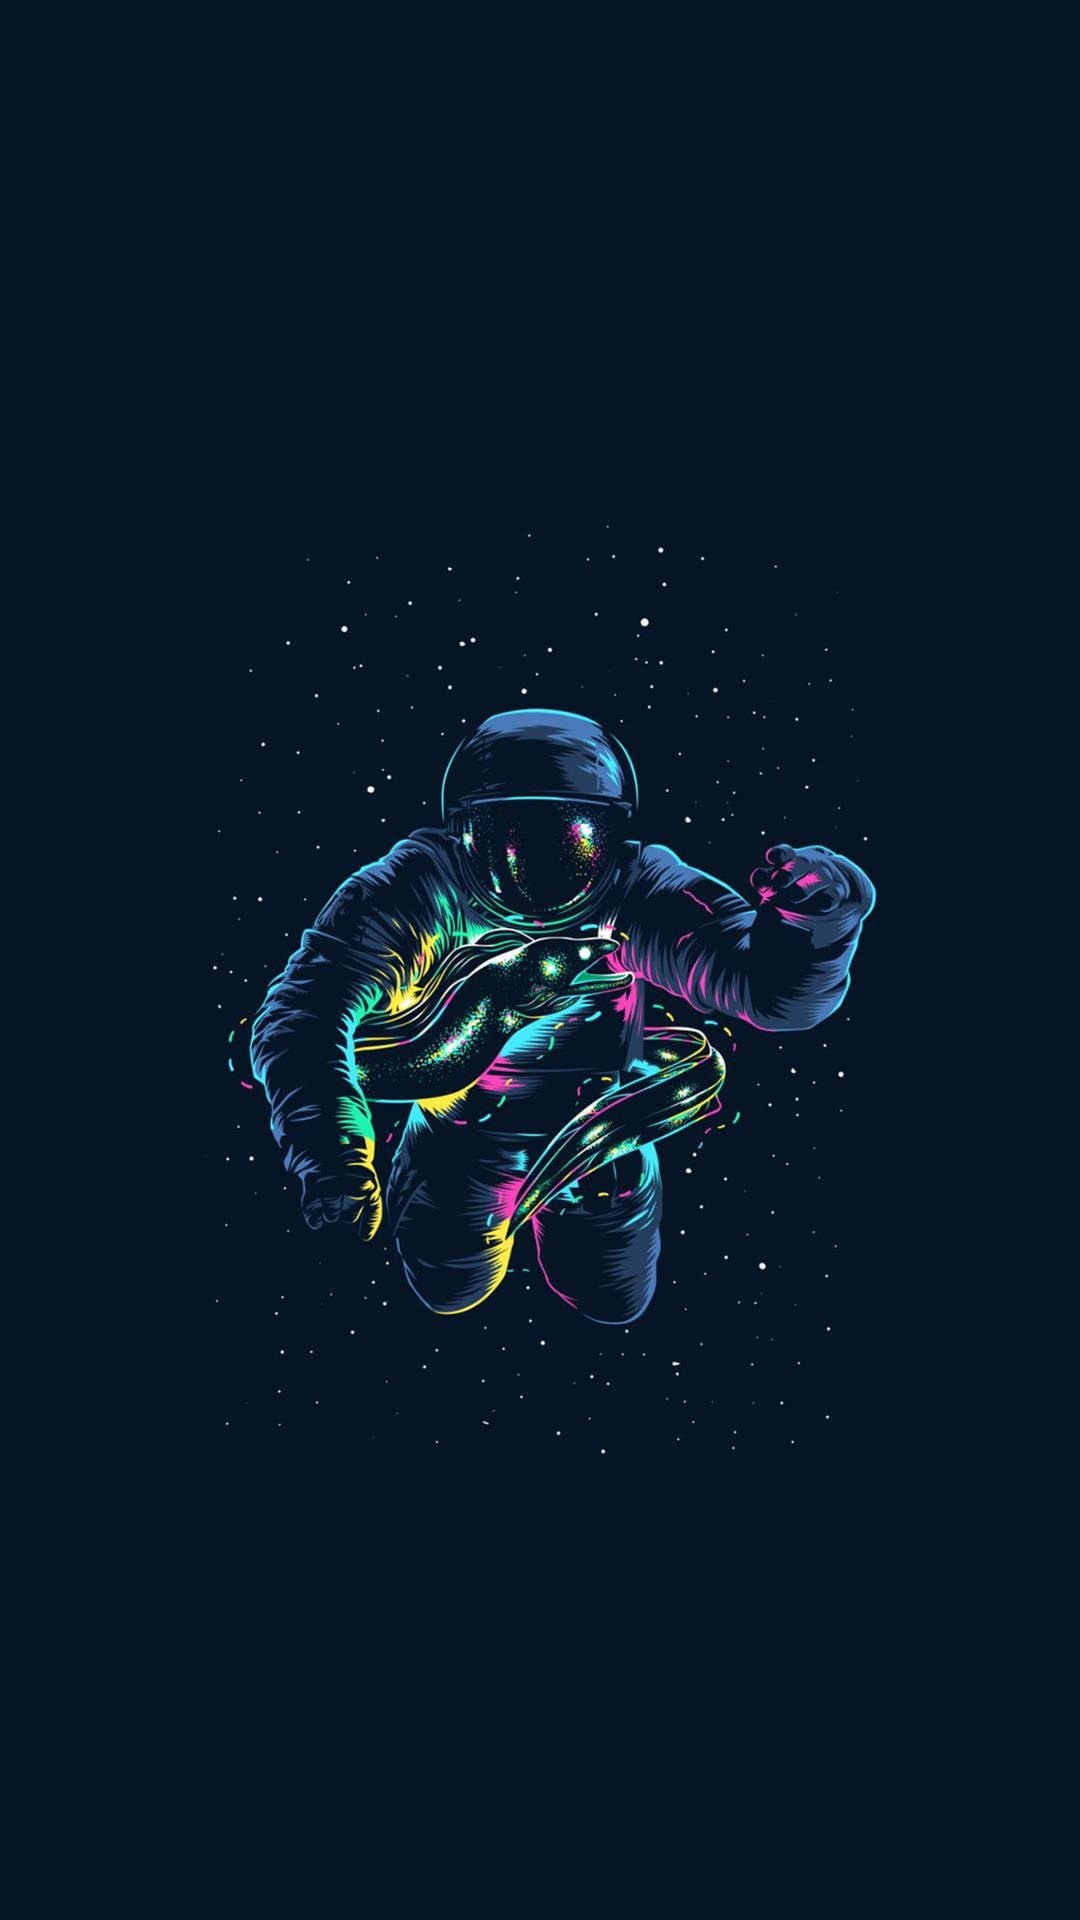 Download Black And White Astronaut Neon Colors Wallpaper | Wallpapers.com